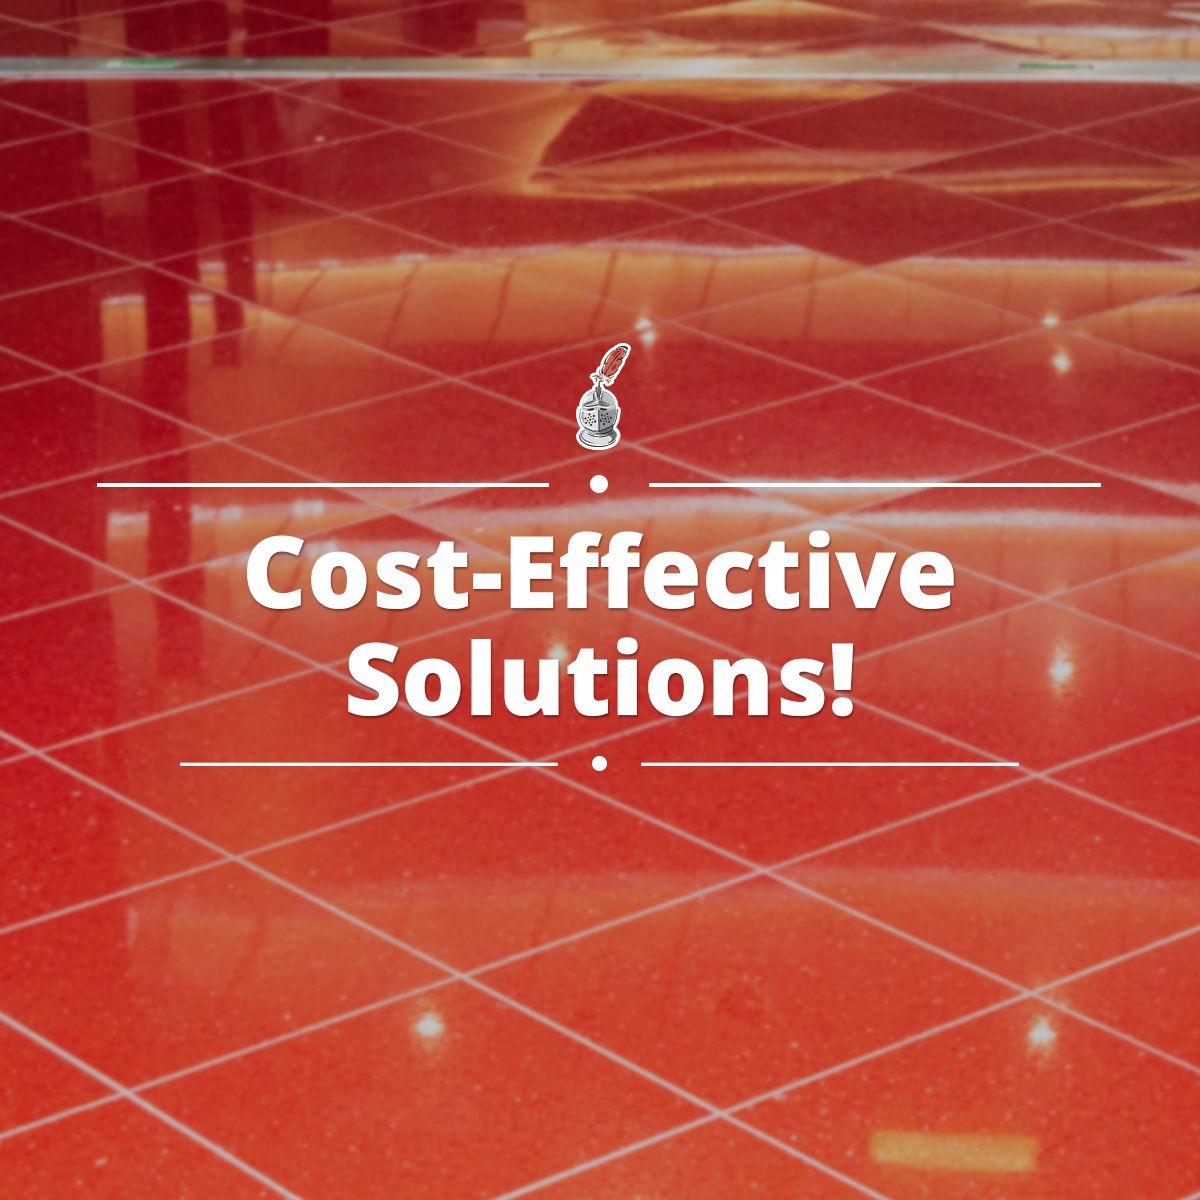 Cost-Effective Solutions!